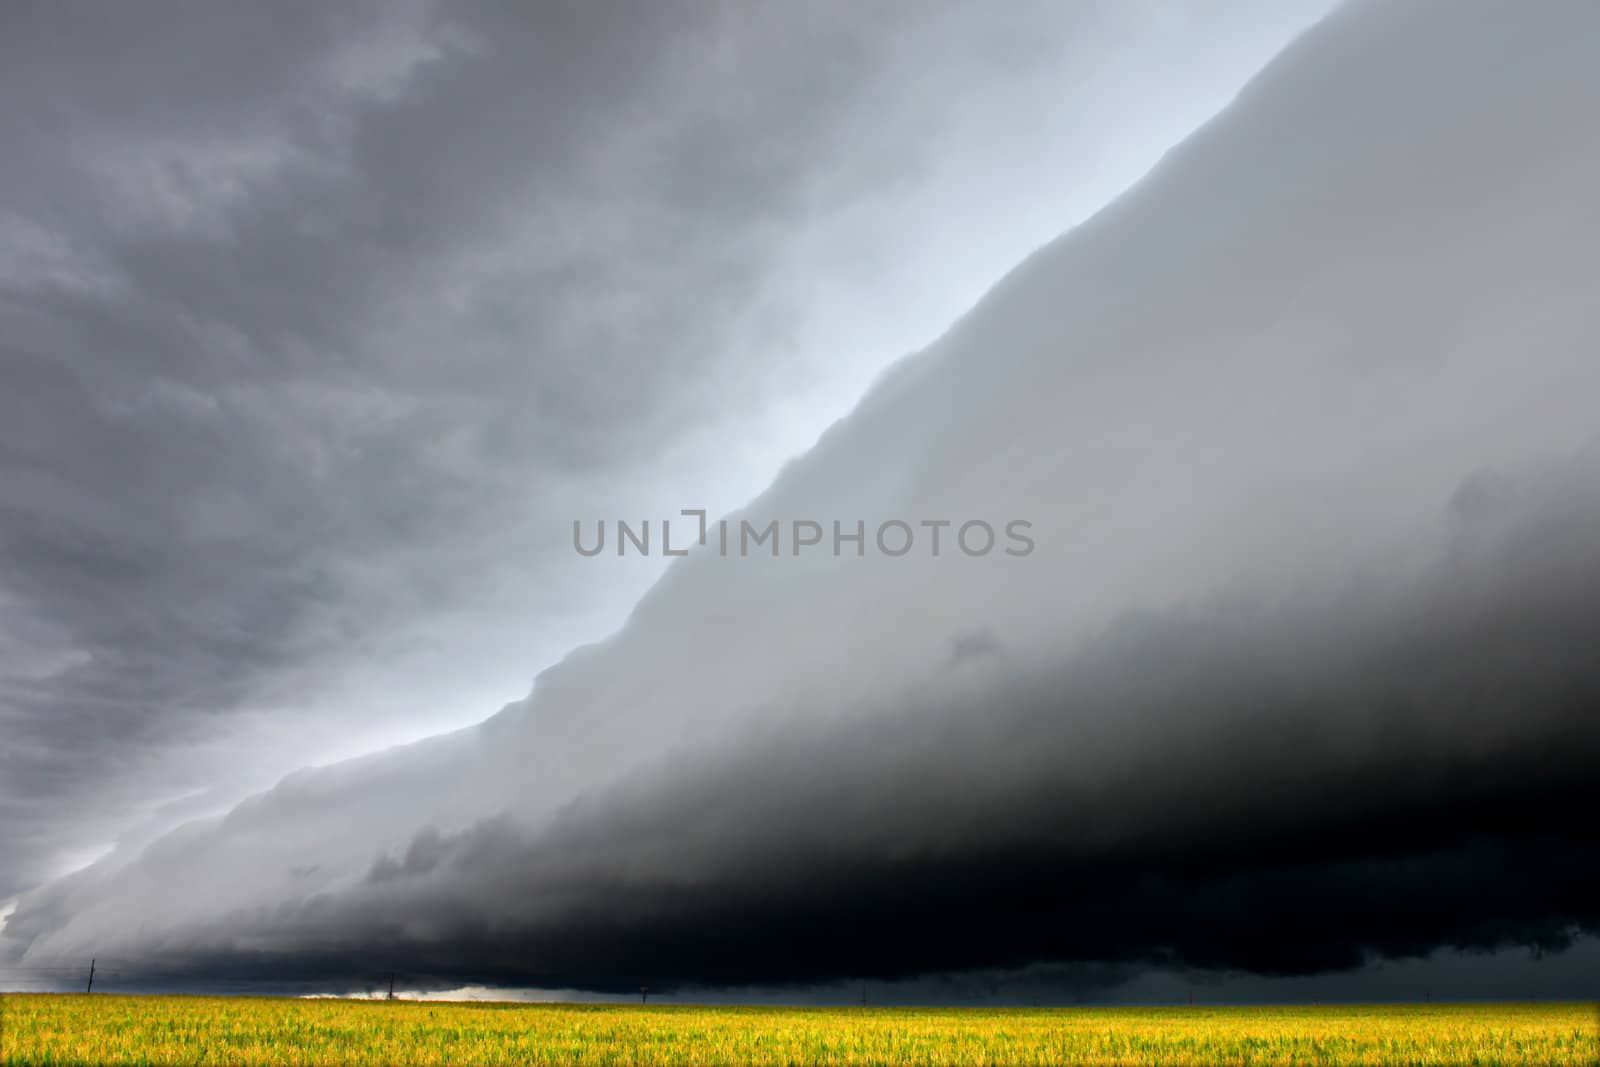 Dark shelf cloud in Illinois foreshadows a violent storm raging in from the west.